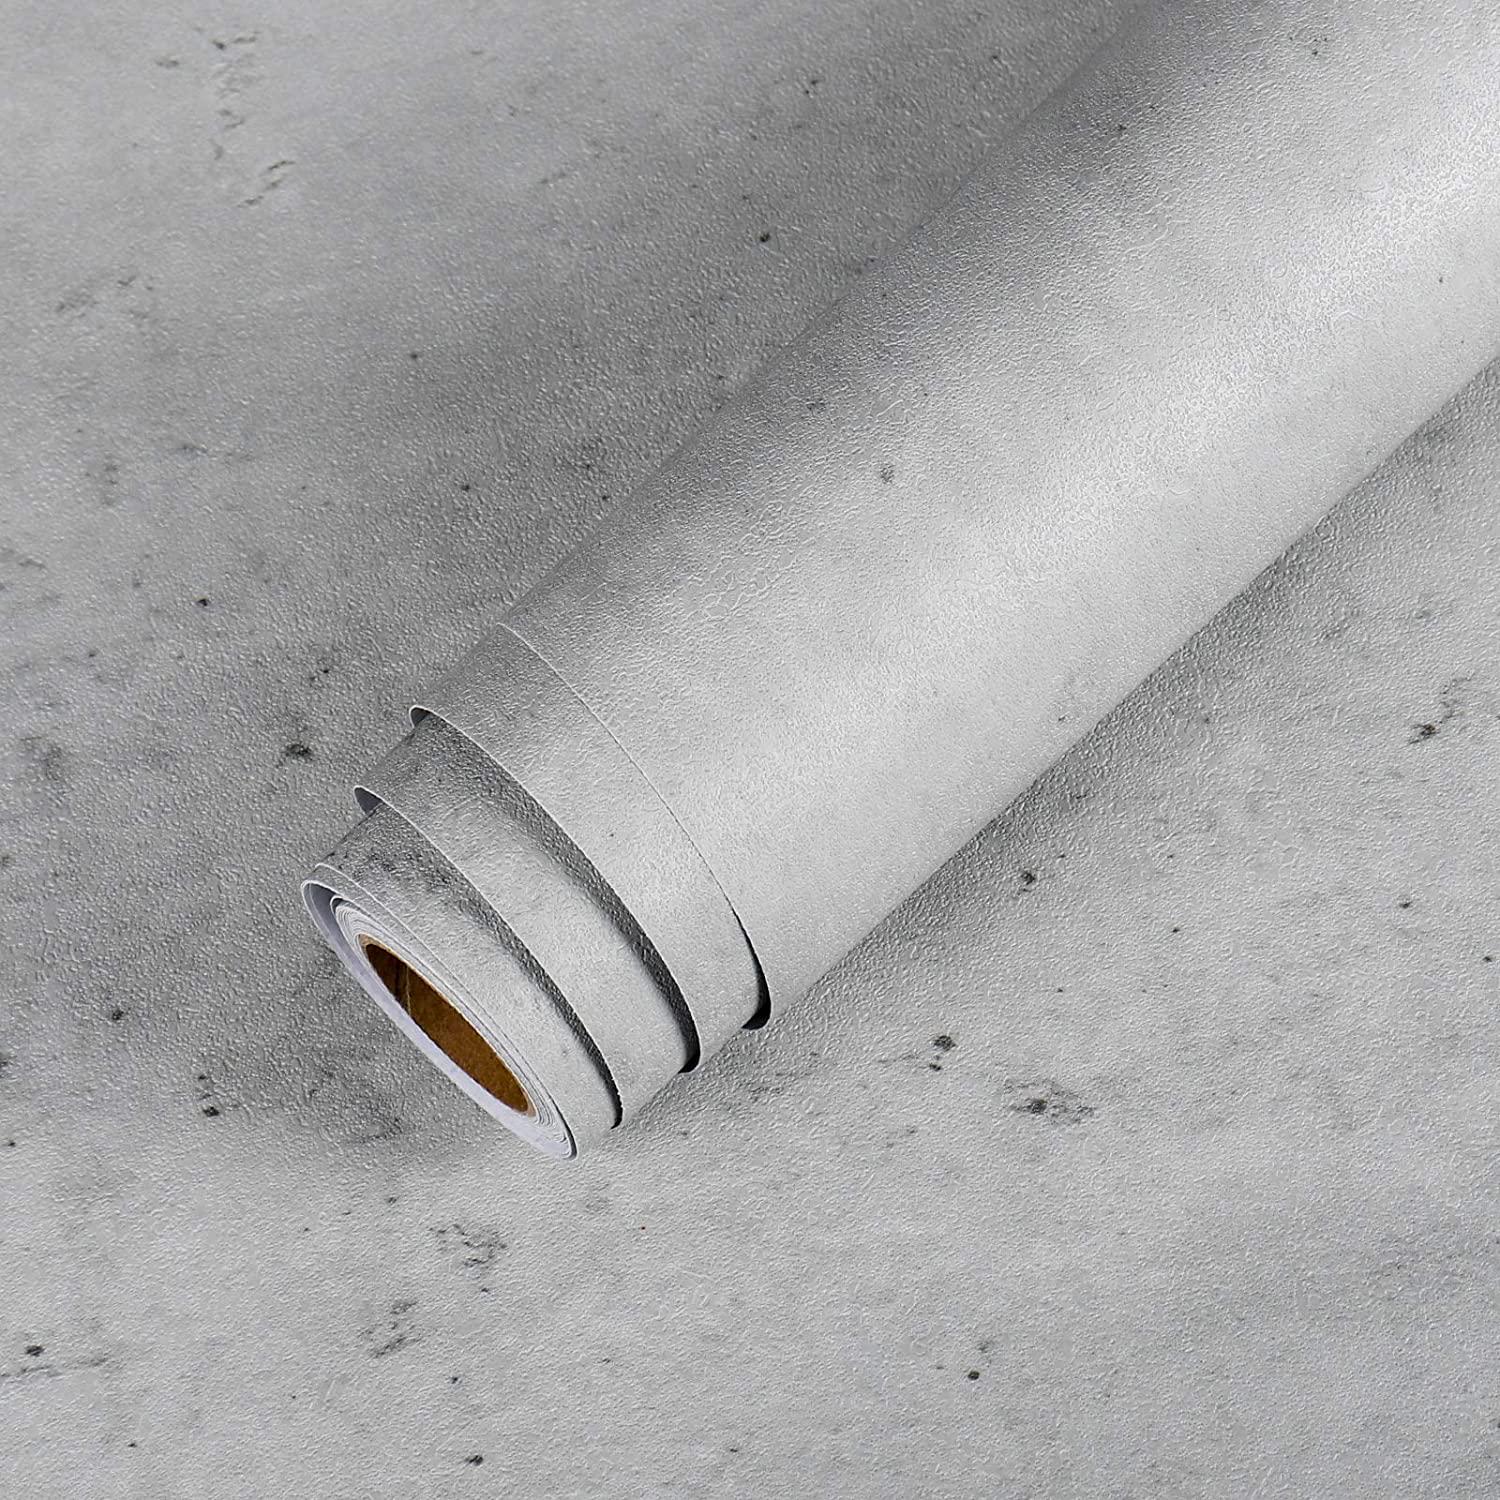 LACHEERY, LaCheery 15.8 x160 Grey Concrete Wallpaper Wall Paper Roll Peel and Stick Removable Self Adhesive Contact Paper for Countertops Cement Decorative Wallpaper for Cabinets Backsplash Backdrop Walls